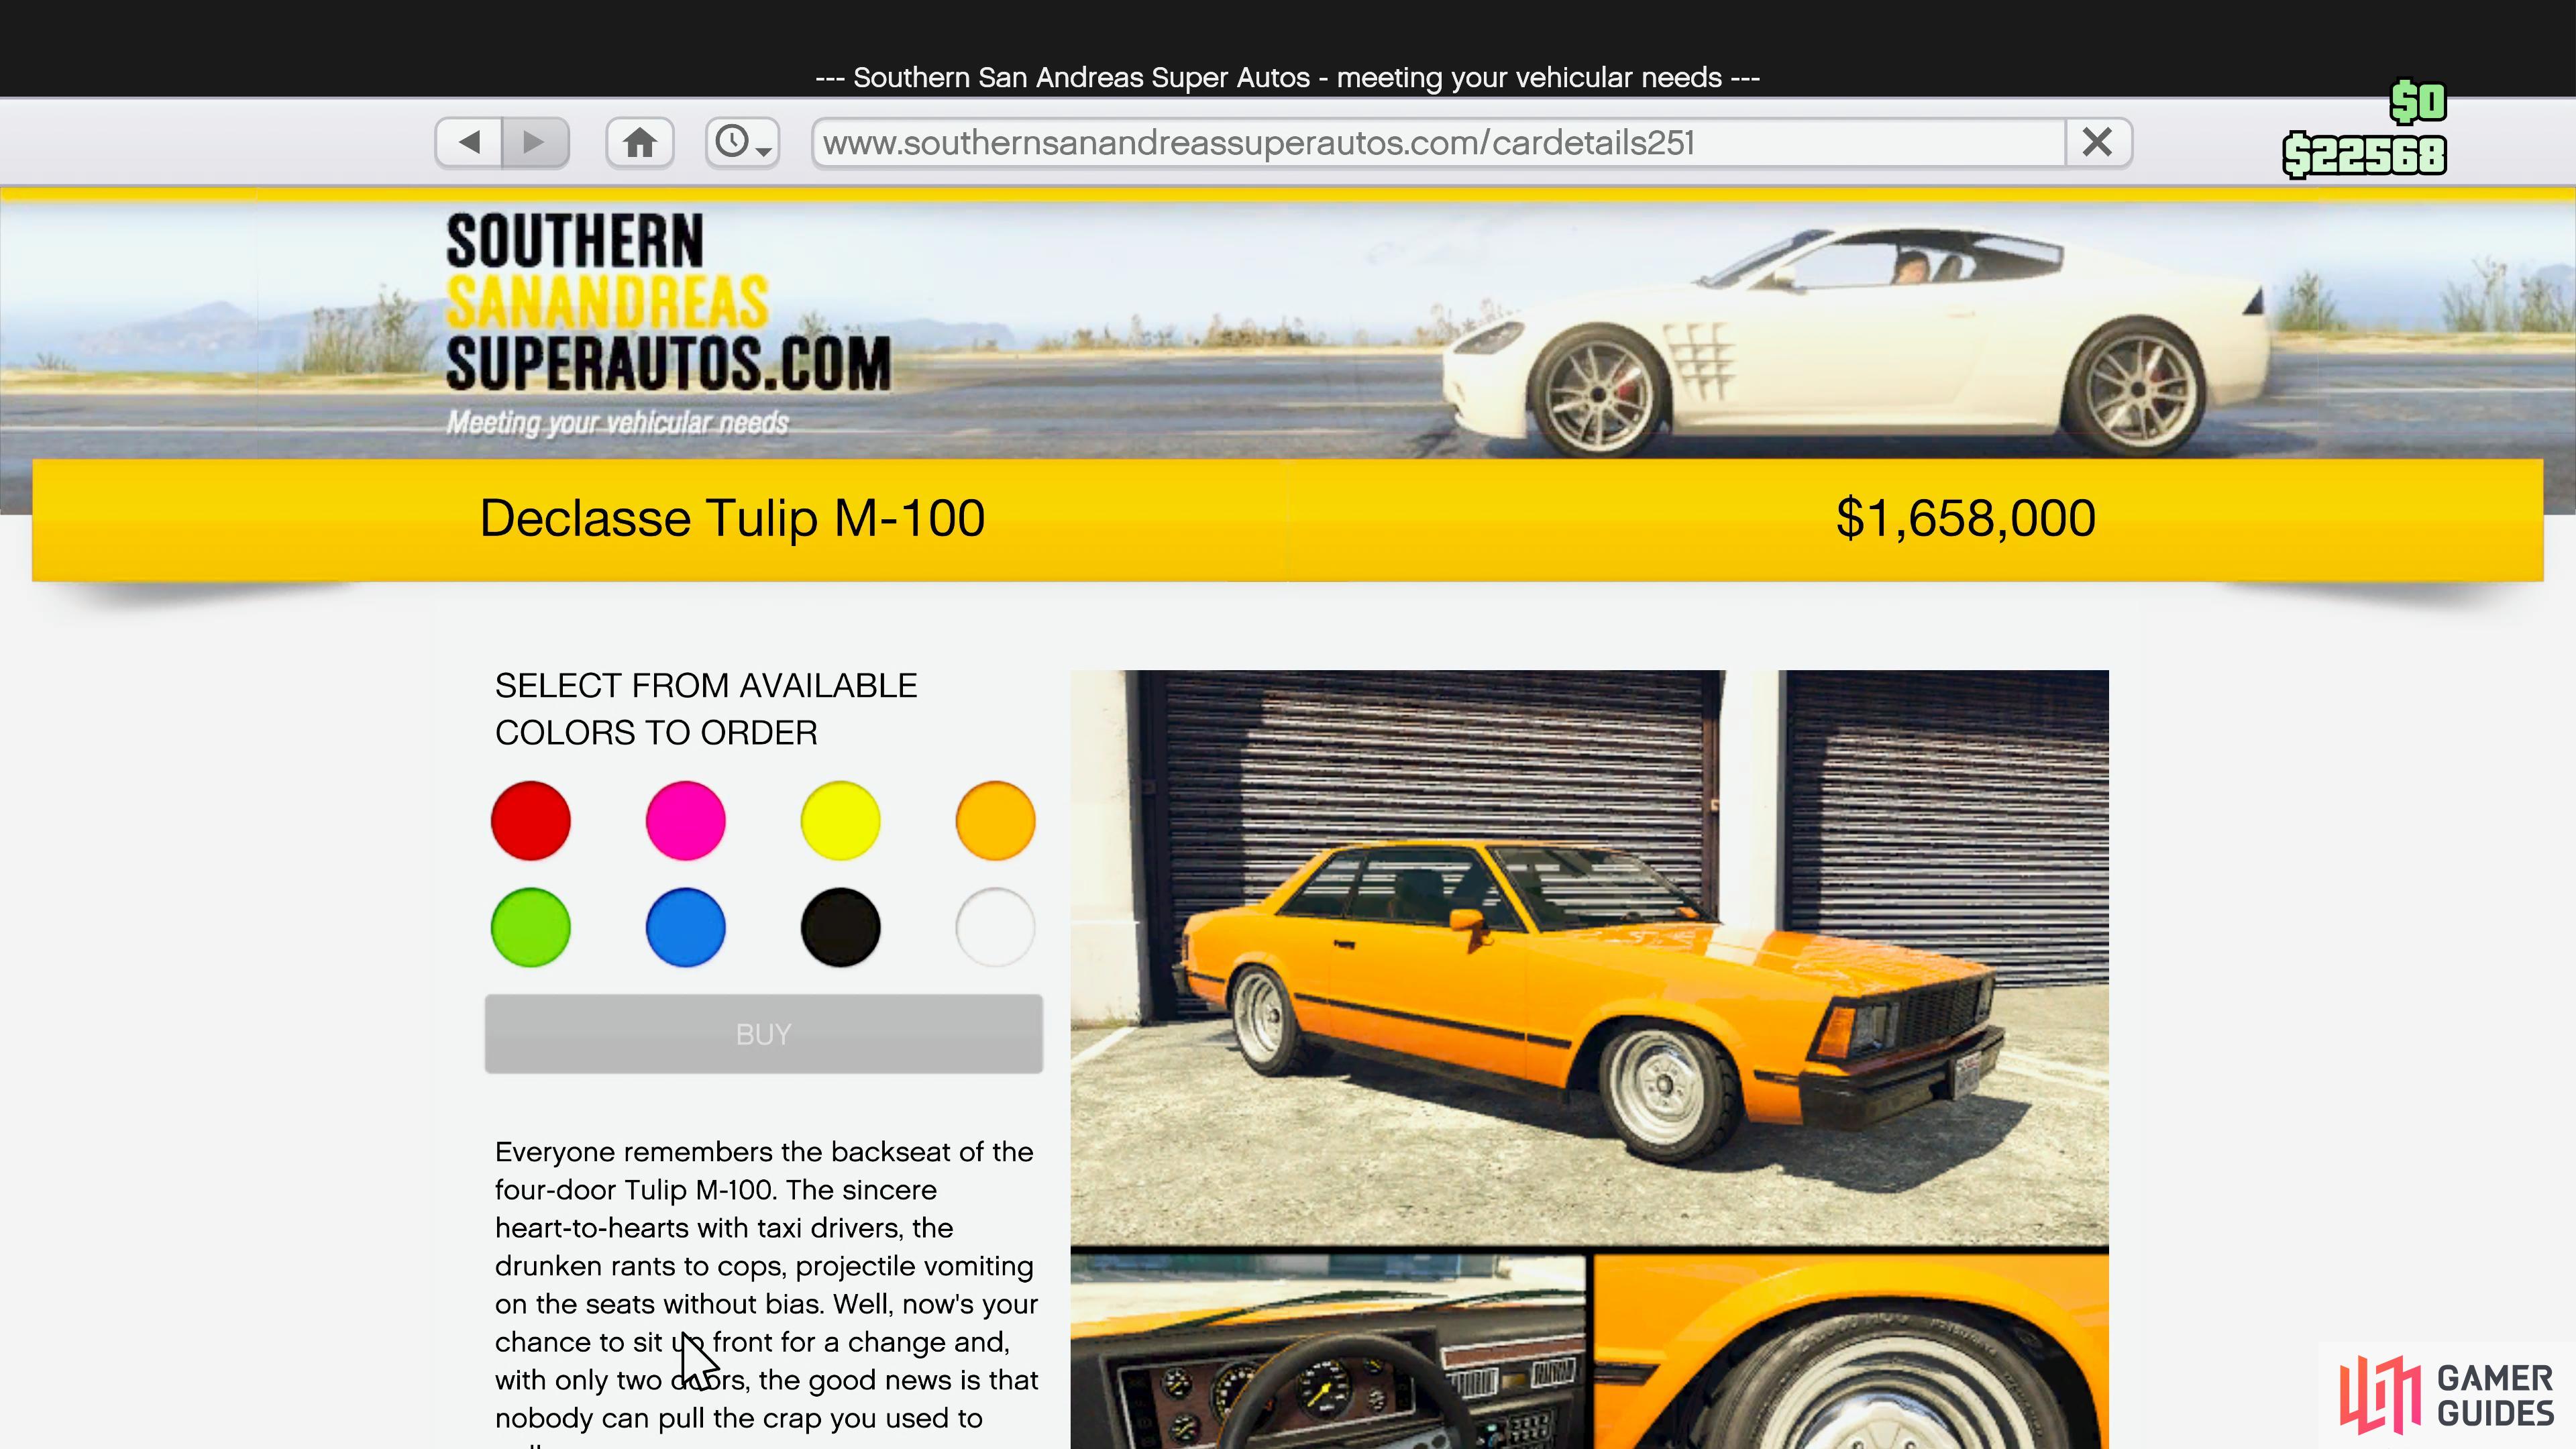 You can purchase the Declasse Tulip M-100 from the Southern San Andreas Super Auto.